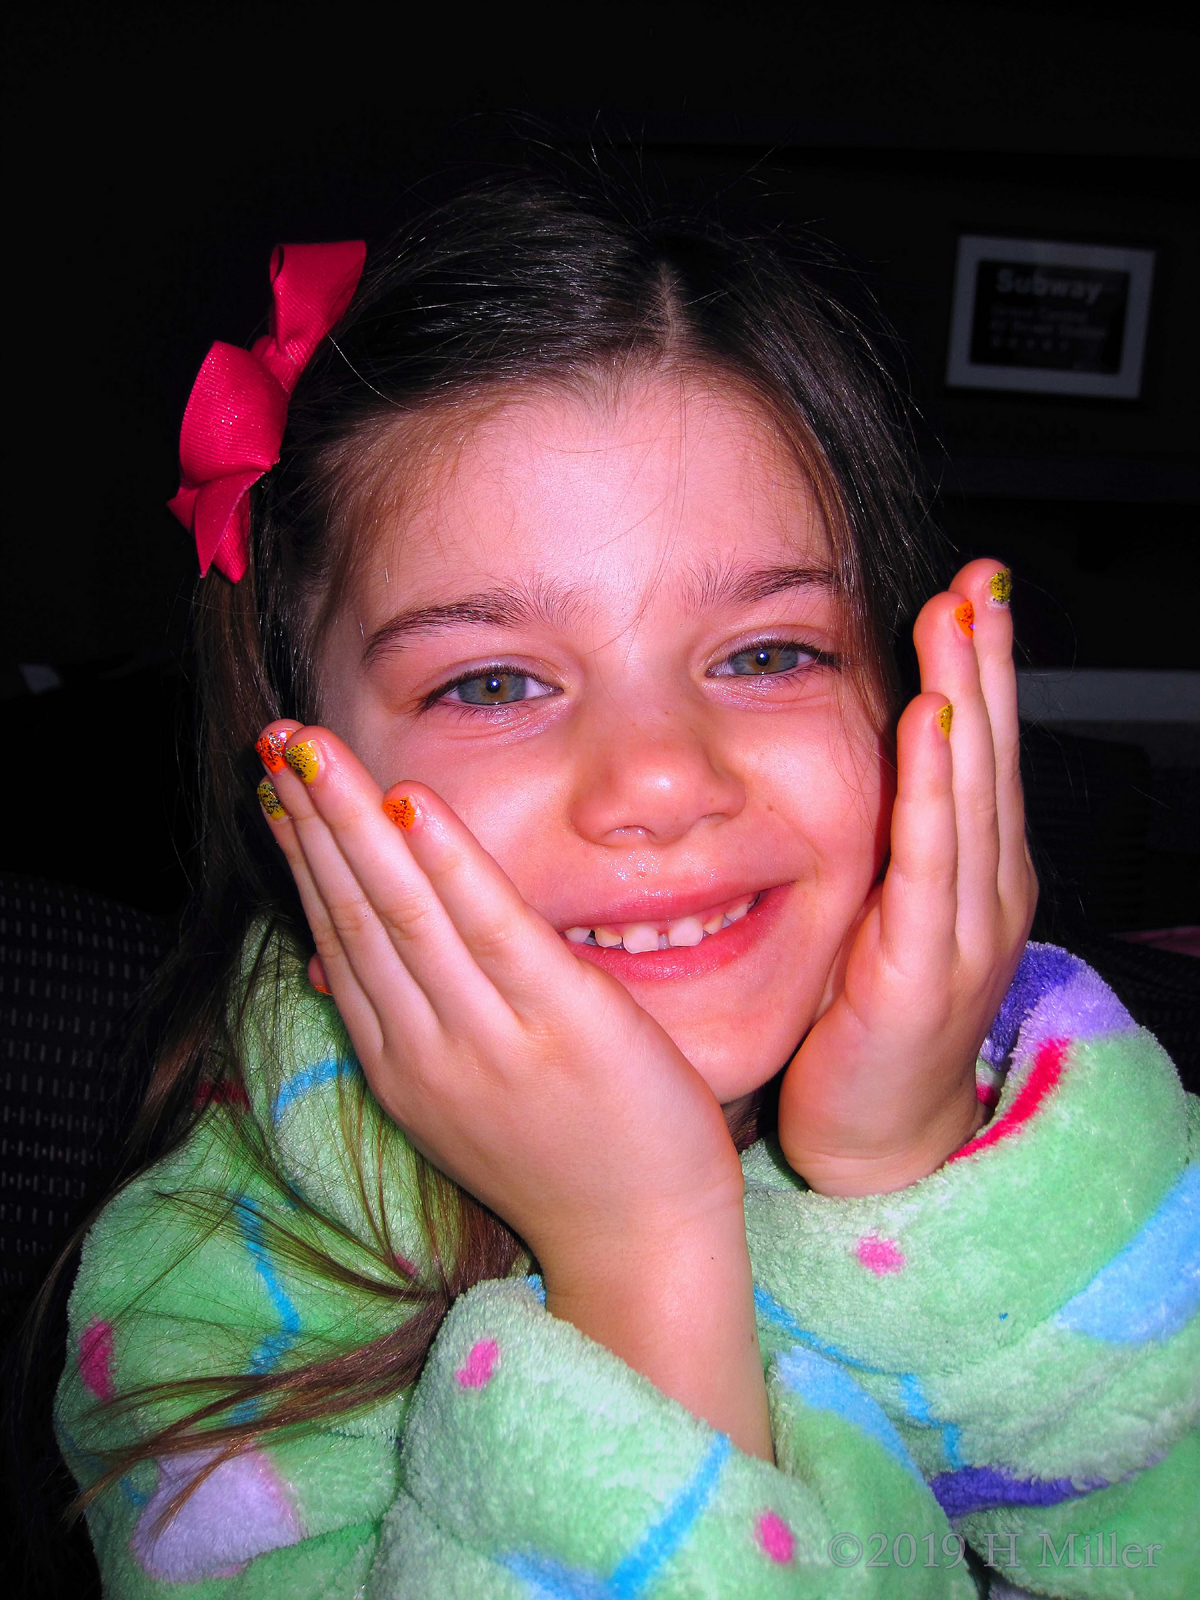 Big Smiles For Cool Styles! She Loves Her Girls Manicure! 